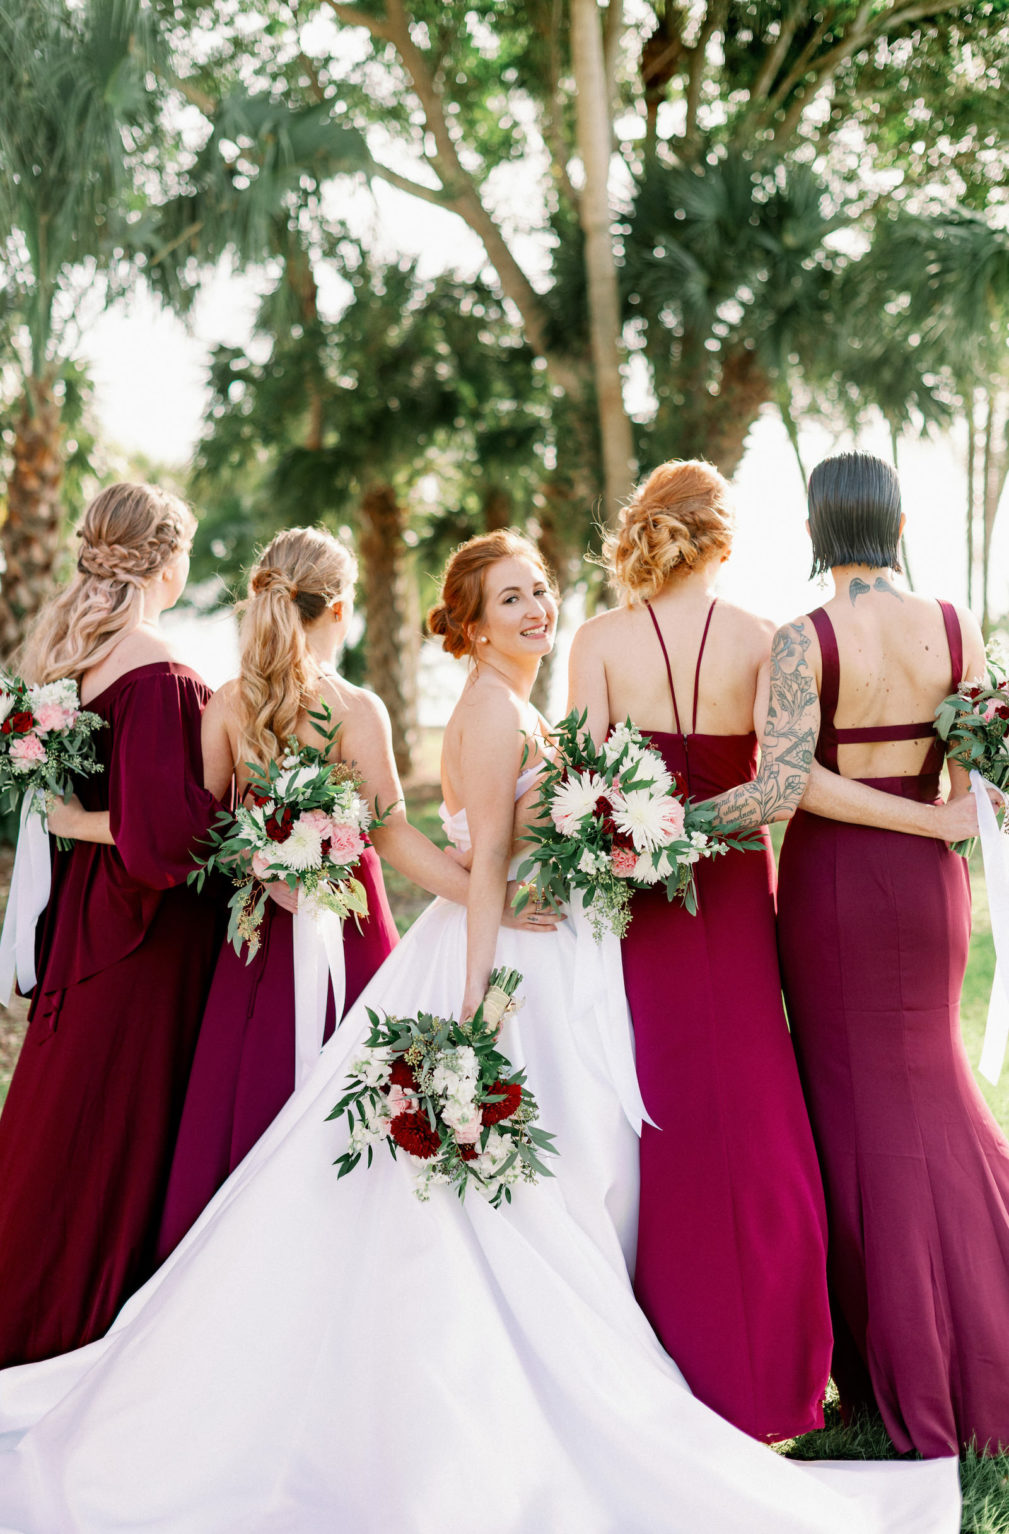 Bride and Bridesmaids in Mix and Match Burgundy Dresses Holding White, Blush Pink and Dark Red with Greenery Floral Bouquets | Tampa Bay Wedding Photographer Dewitt for Love Photography